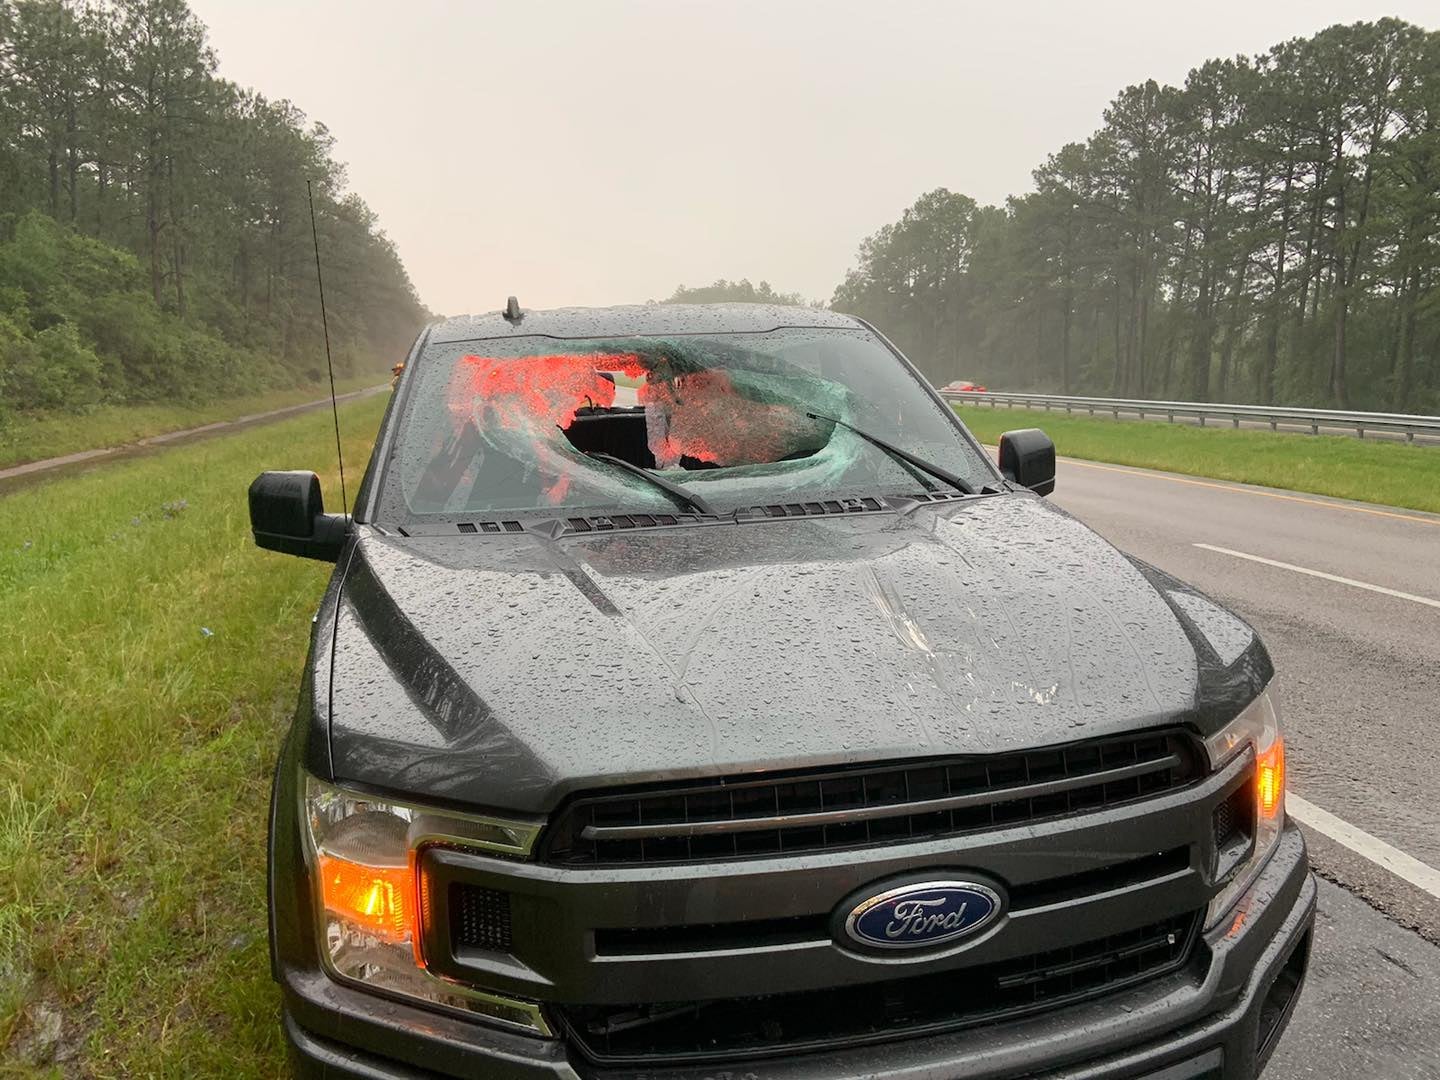 A chunk of roadway smashed the windshield of a truck near Pensacola, Florida